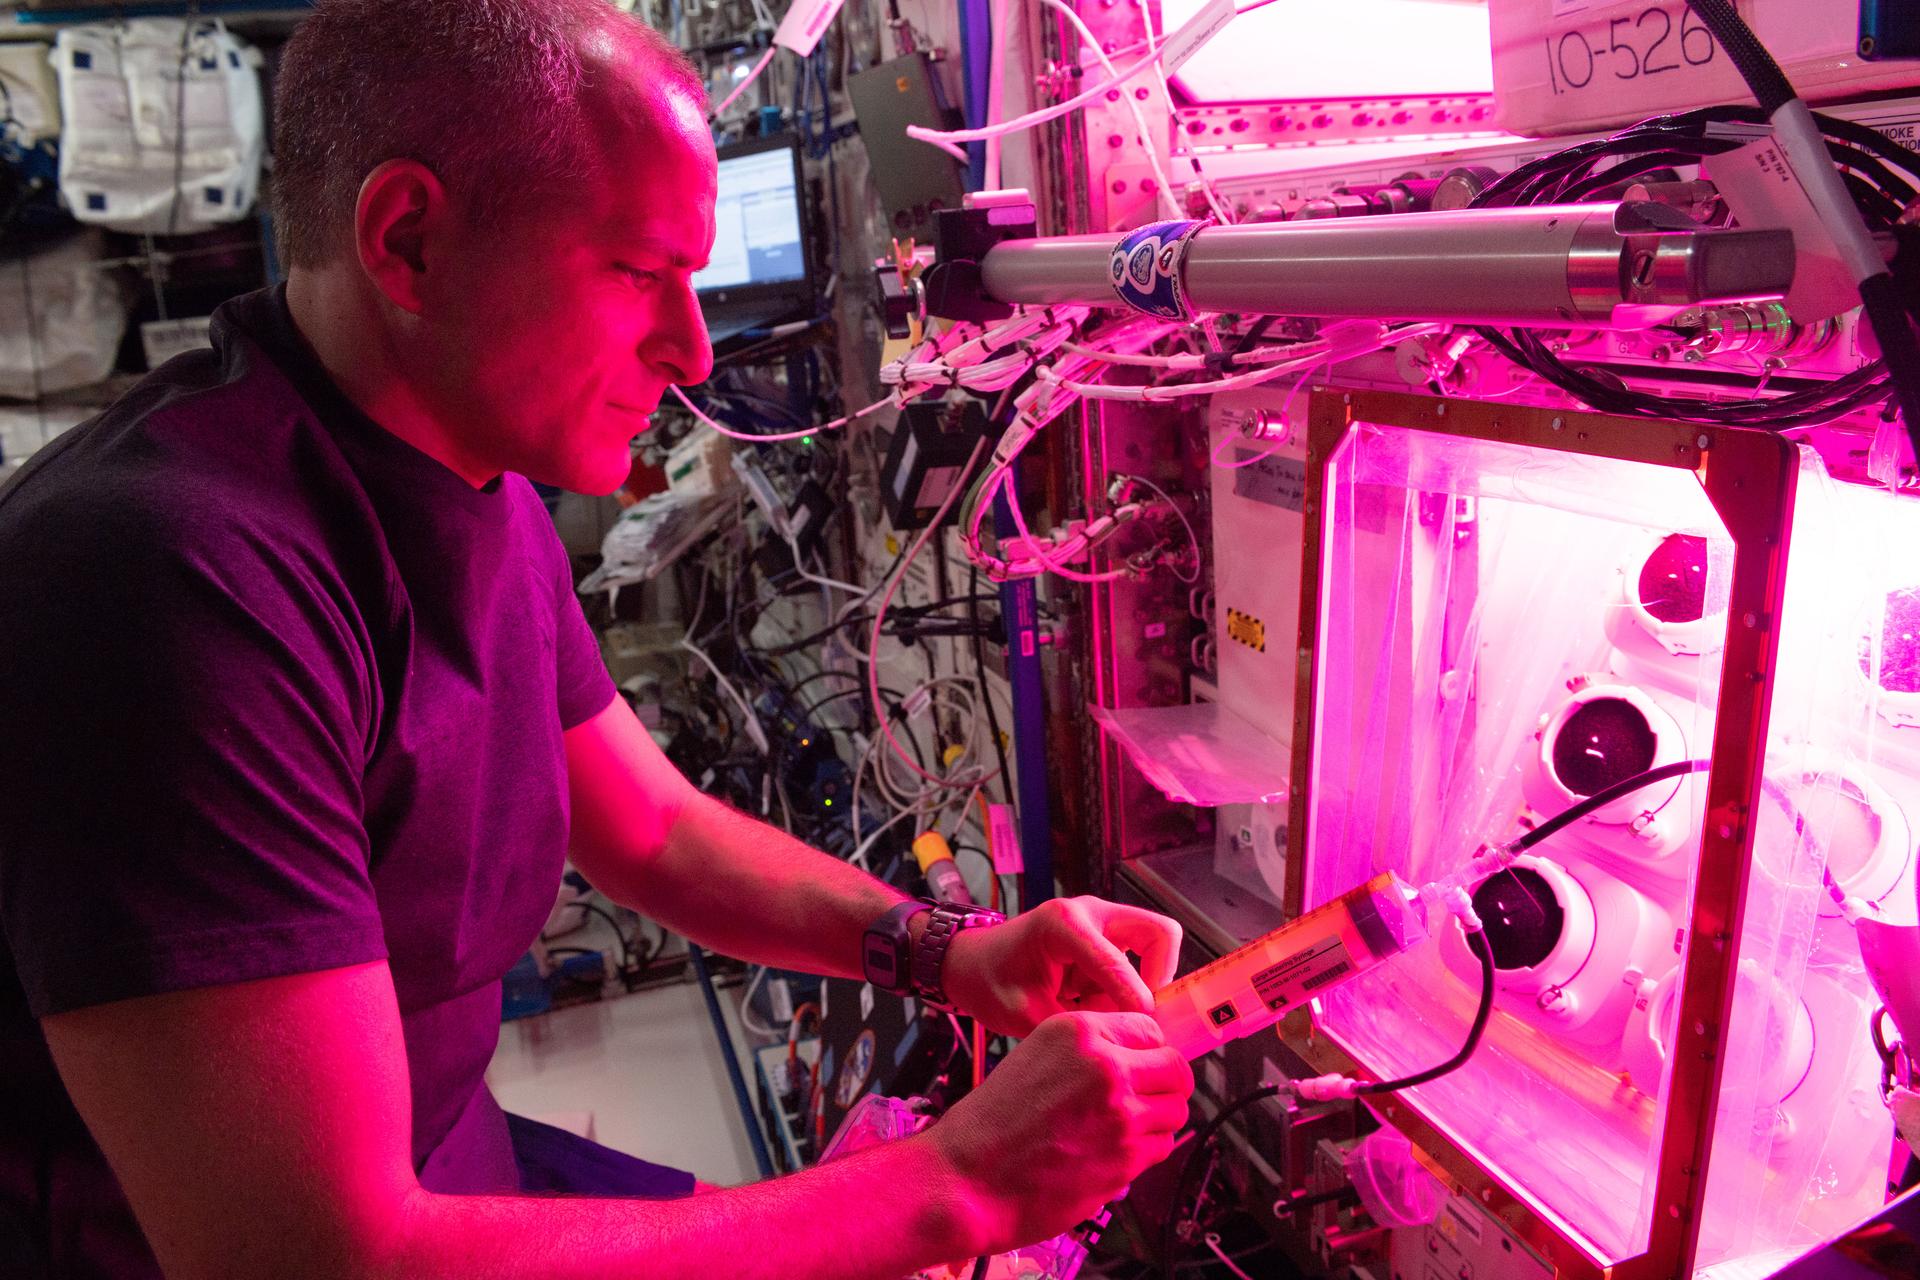 The Veg-PONDS-02 experiment is underway aboard the International Space Station to test an alternative plant growth system.